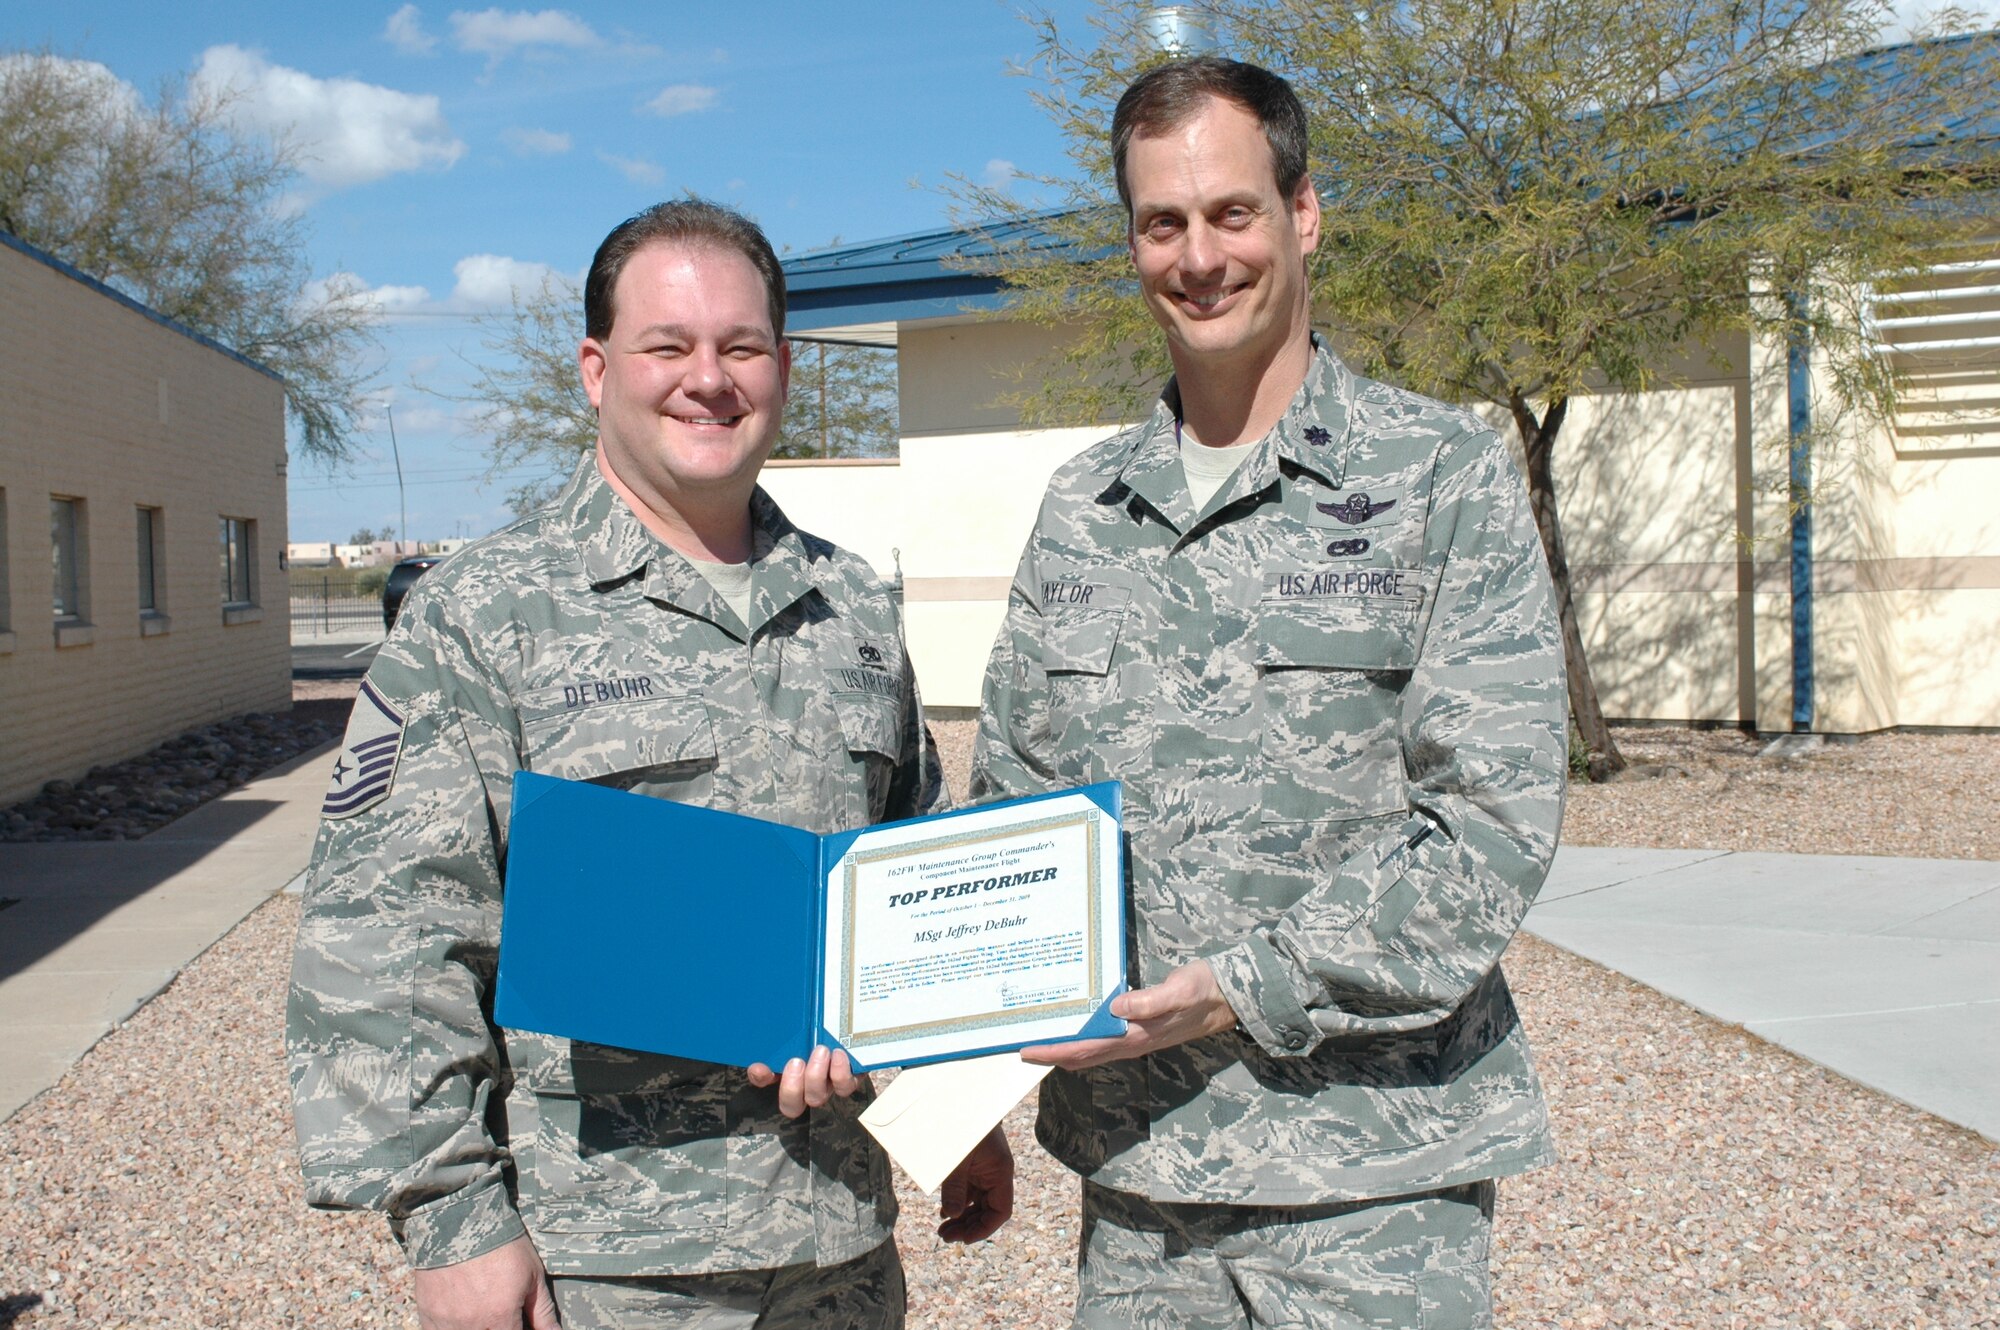 Master Sgt. Jeffrey DeBuhr, (left) component maintenance flight, receives the Elite Performer award from Lt. Col. James Taylor, 162nd Maintenance Group commander, Feb. 4.  Sergeant DeBuhr was chosen for the award from 800 Guardsmen that serve in the maintenance group here.  The award recognizes maintainers who consistently perform quality work, maintain safe work practices, follow technical data, and engage in quality initiatives.  (Air Force photo by Maj. Gabe Johnson)